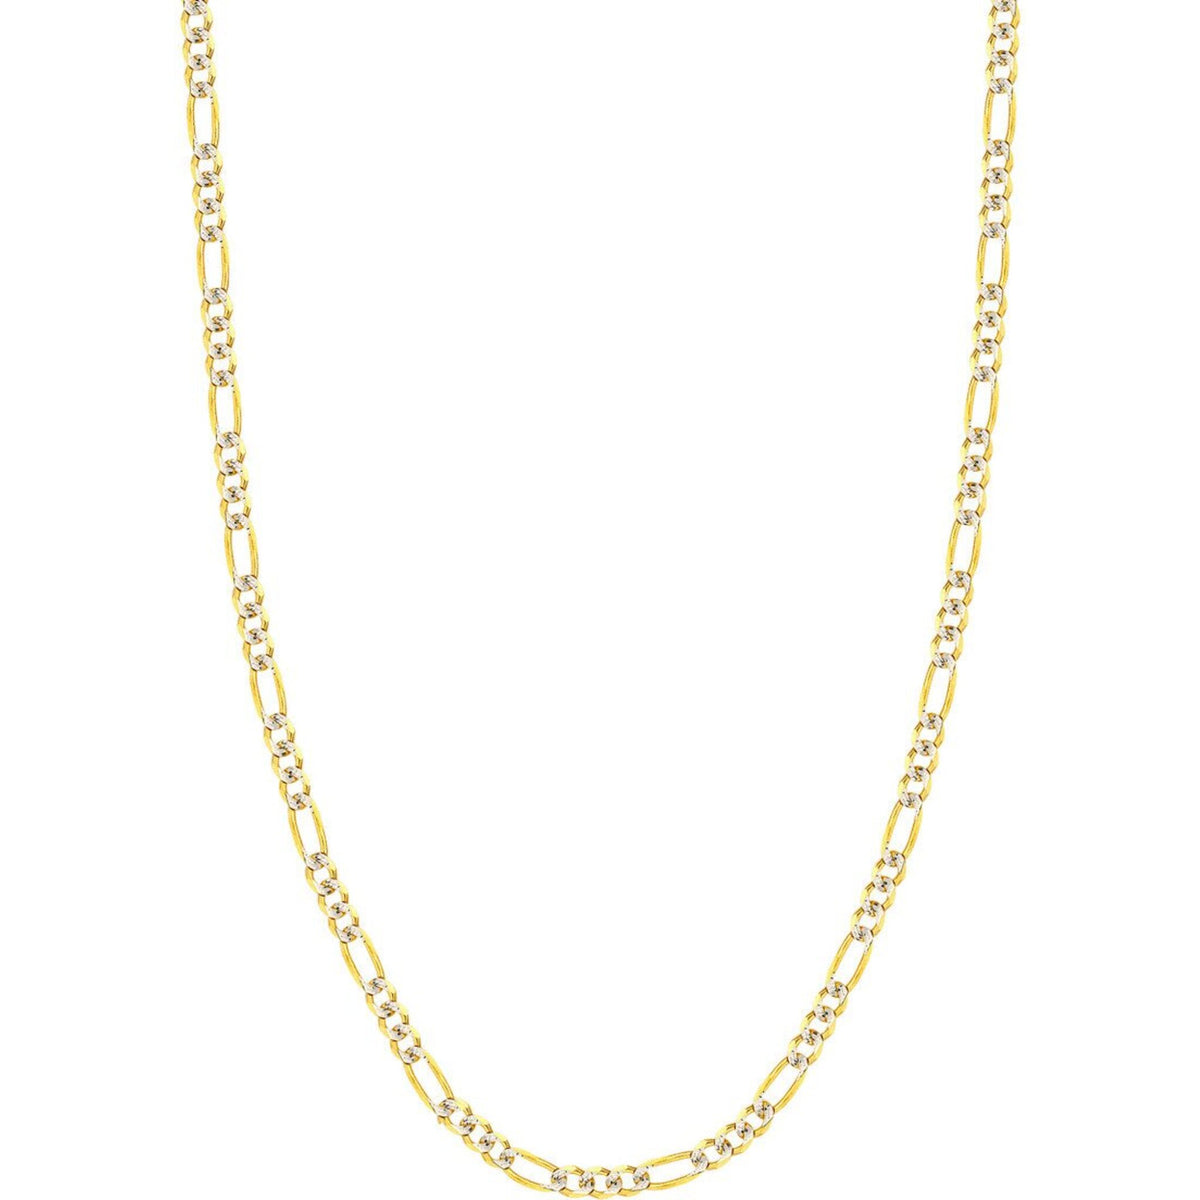 Olas d'Oro 30" Necklace - 14K Yellow/White Gold 5.8mm Two-Tone Pave Figaro Chain with Lobster Lock